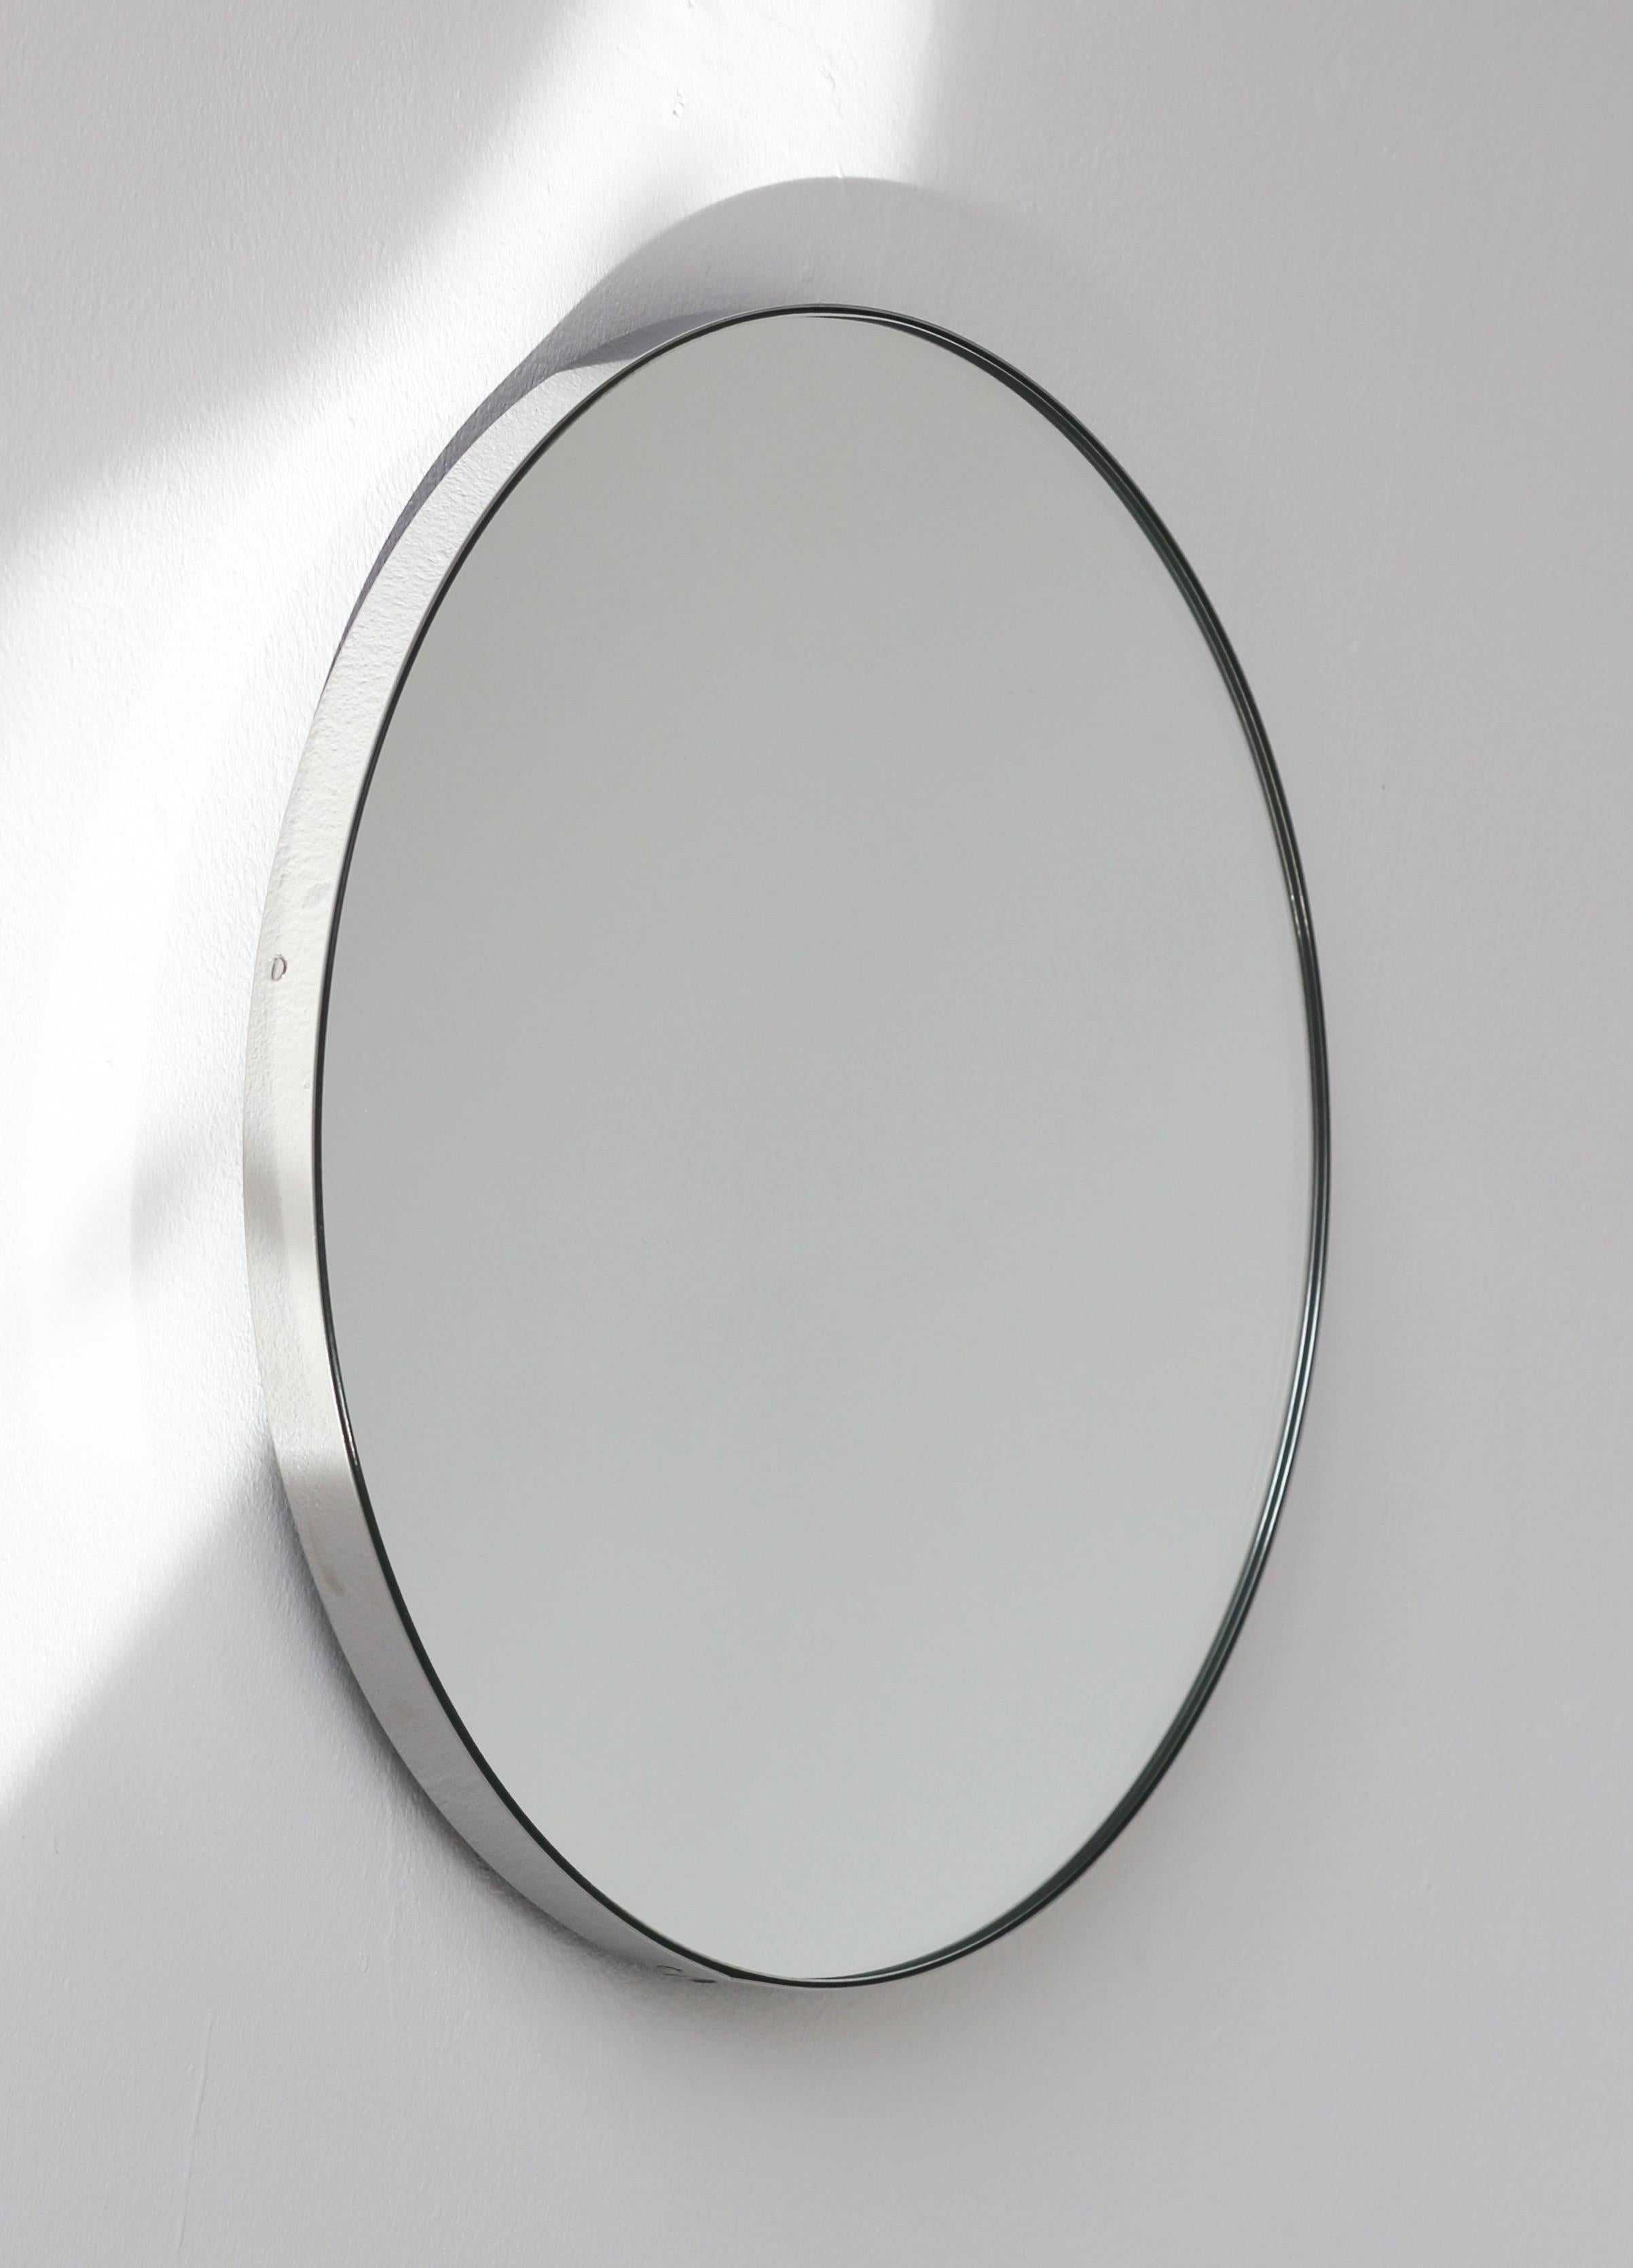 Contemporary Orbis Round Handcrafted Mirror with Stainless Steel Frame, XL For Sale